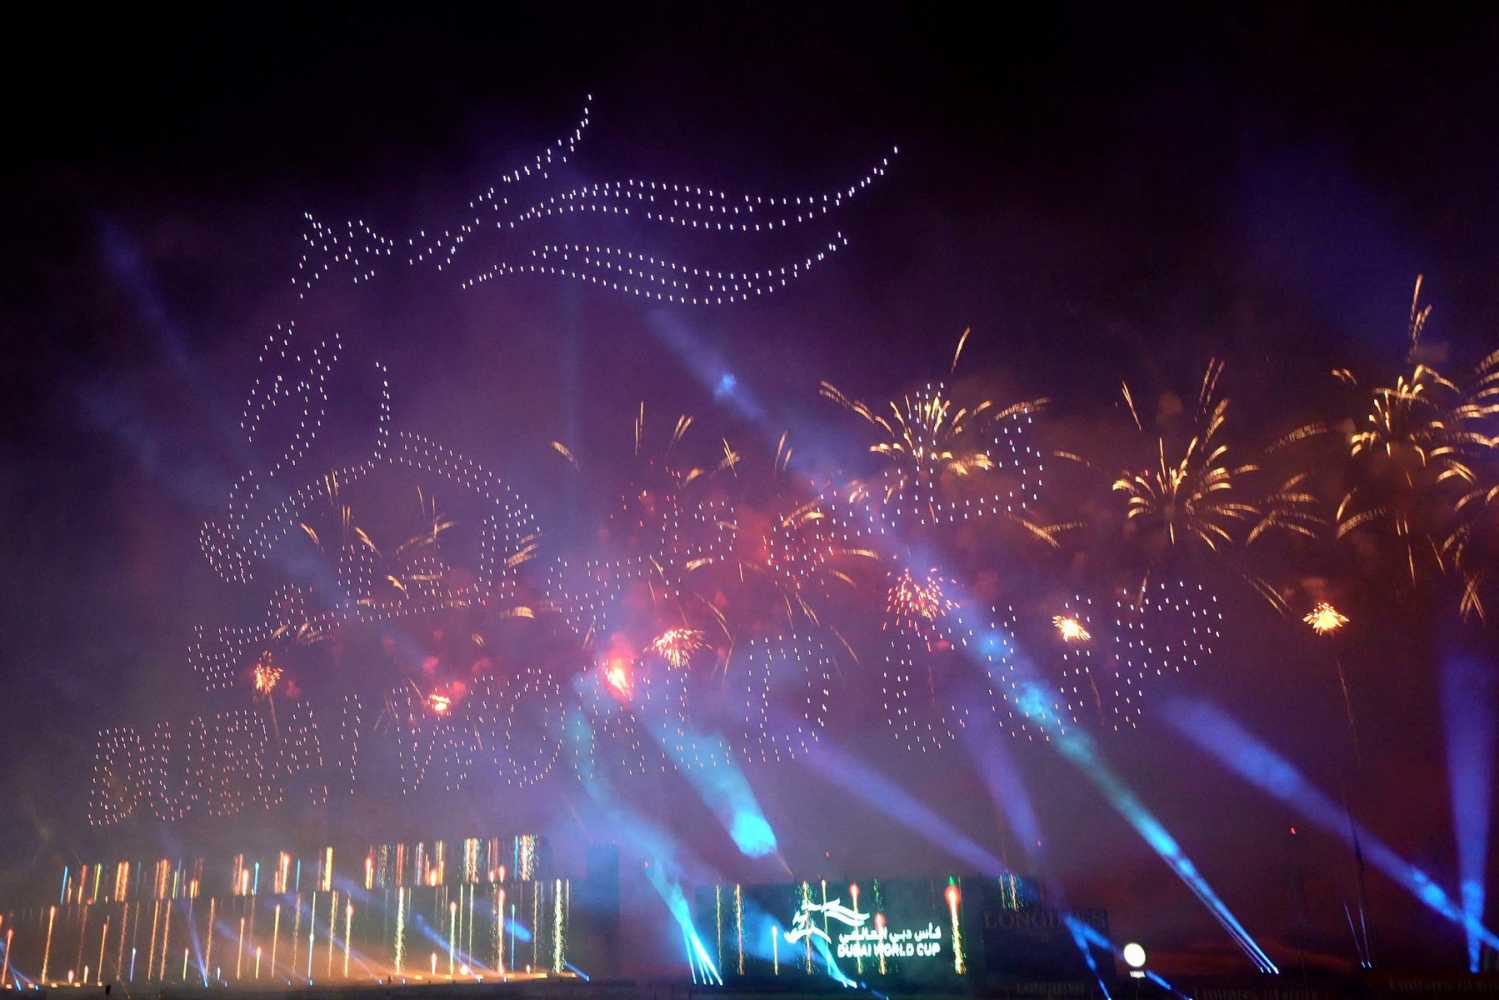 The creative team delivered a spectacle with pyro glider planes, drones, lighting, video and fireworks